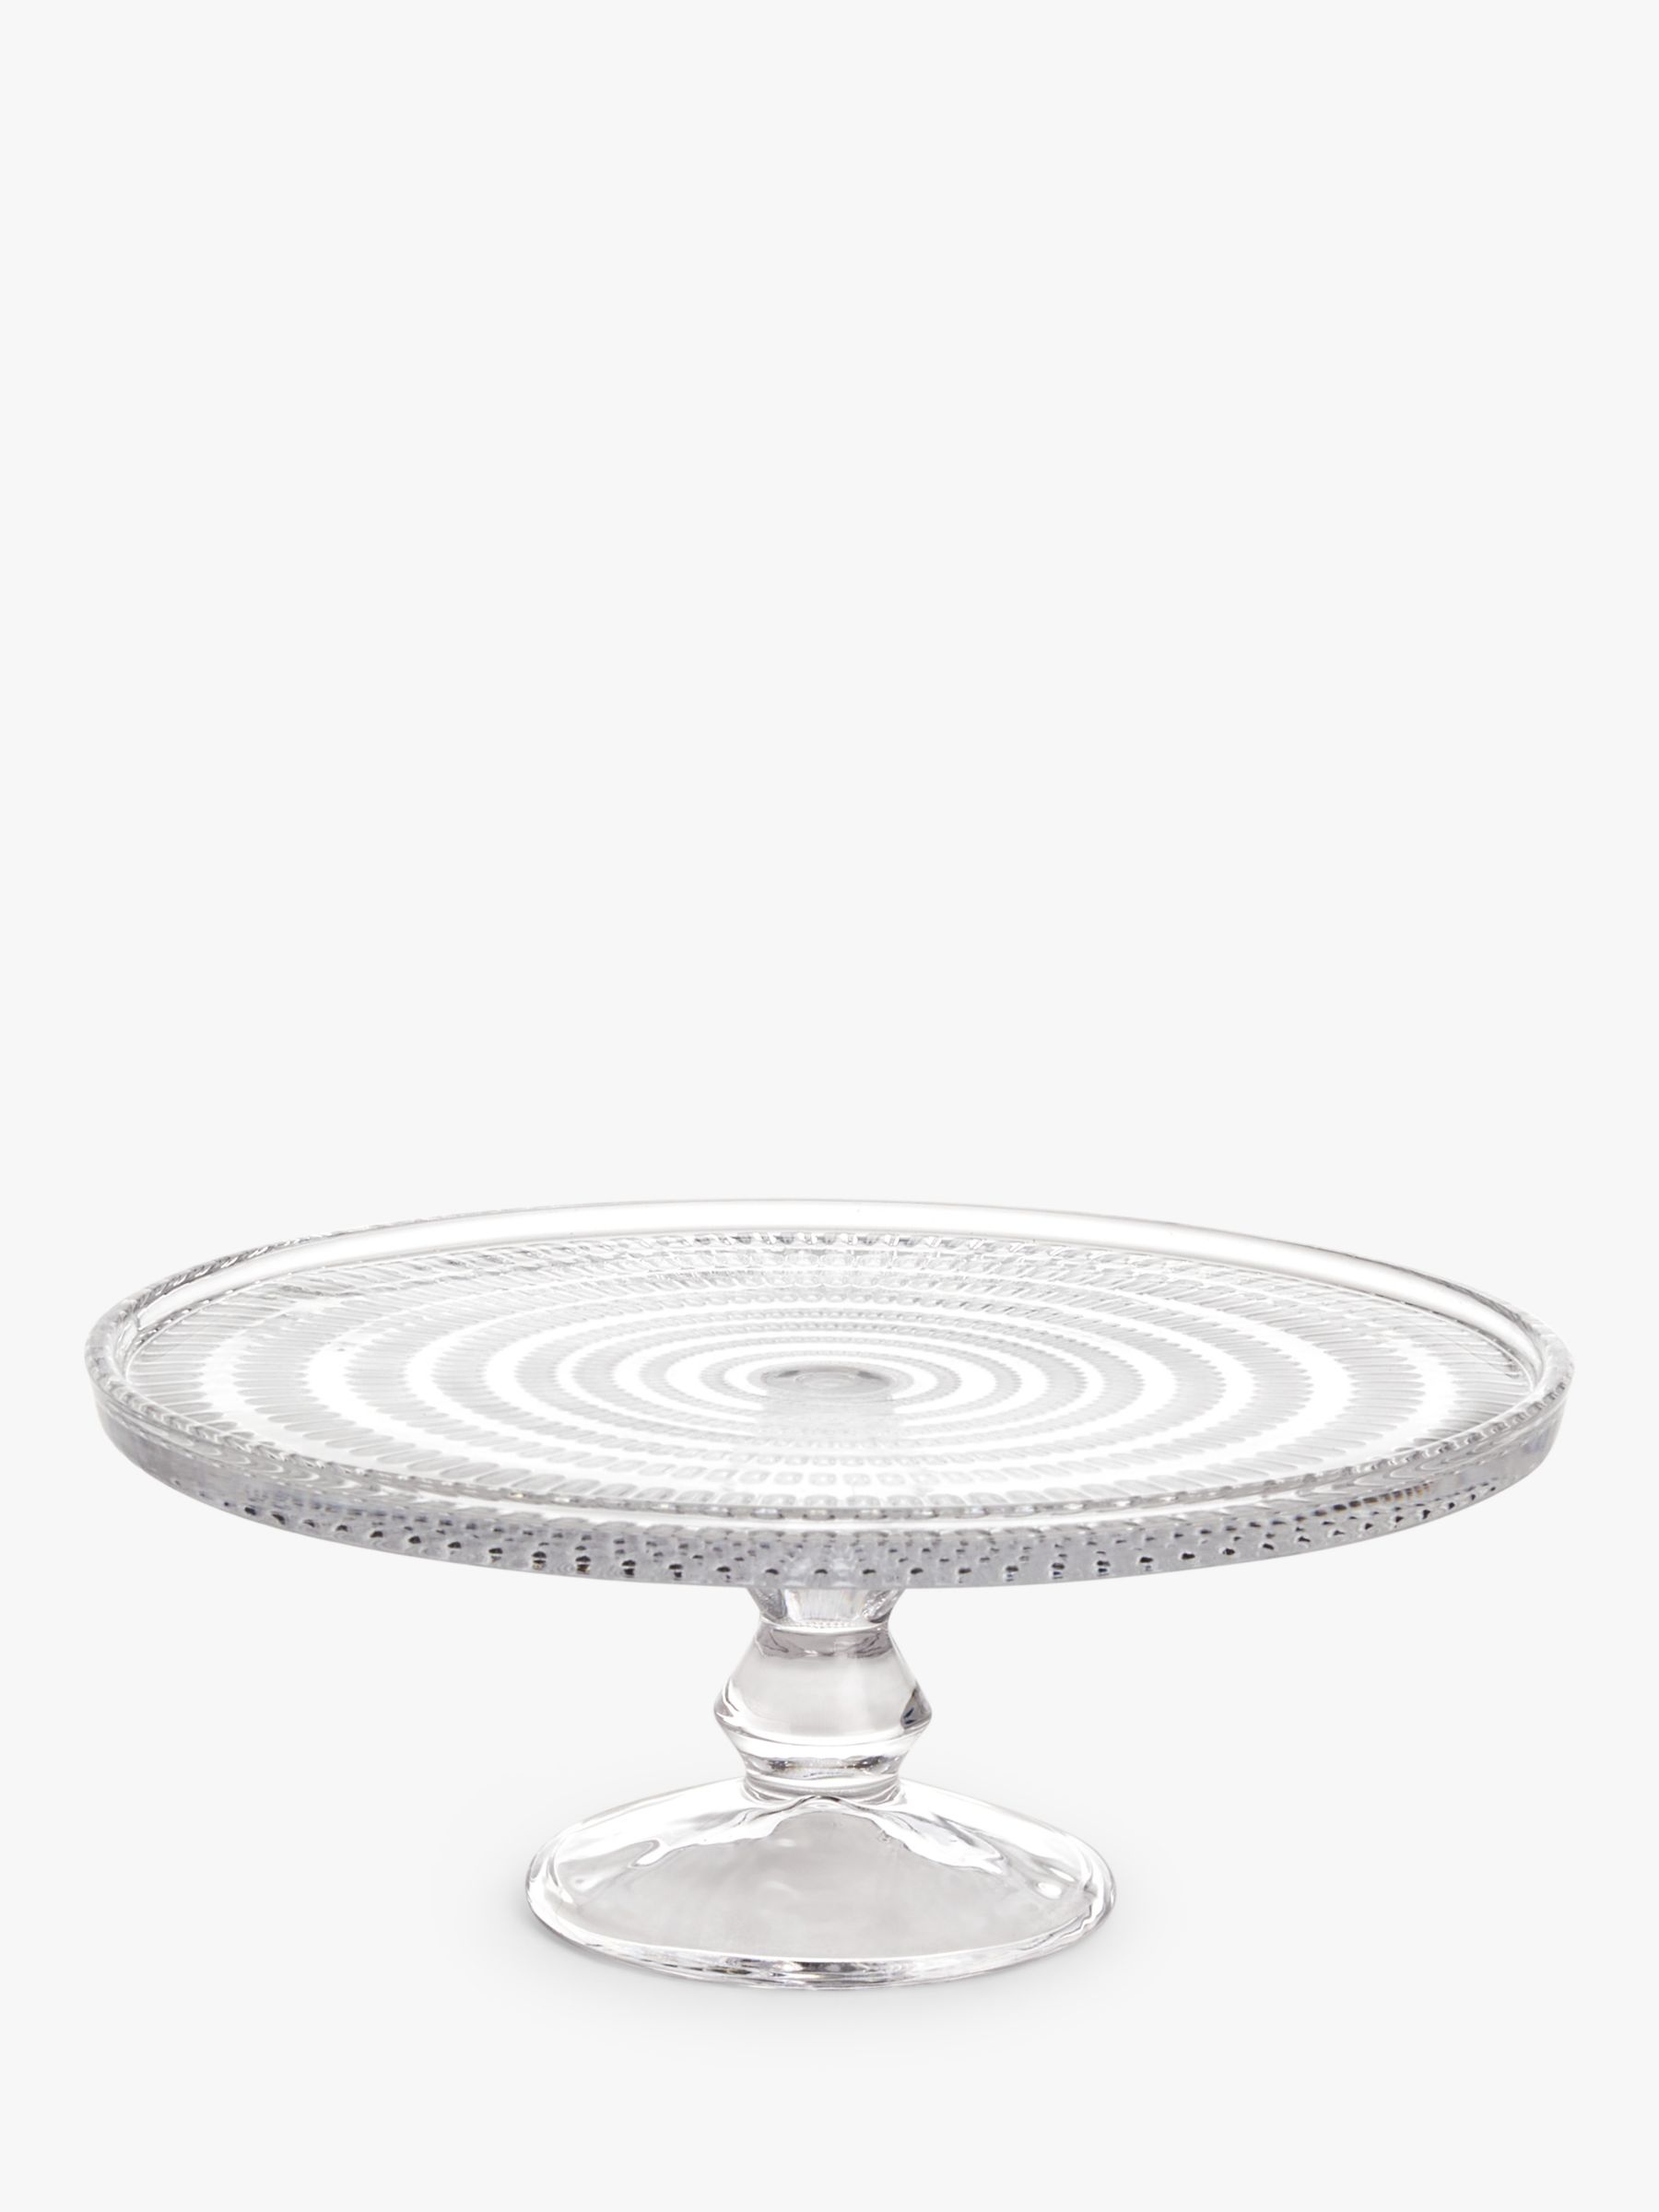 John Lewis Pressed Glass Cake Stand, 25cm, Clear